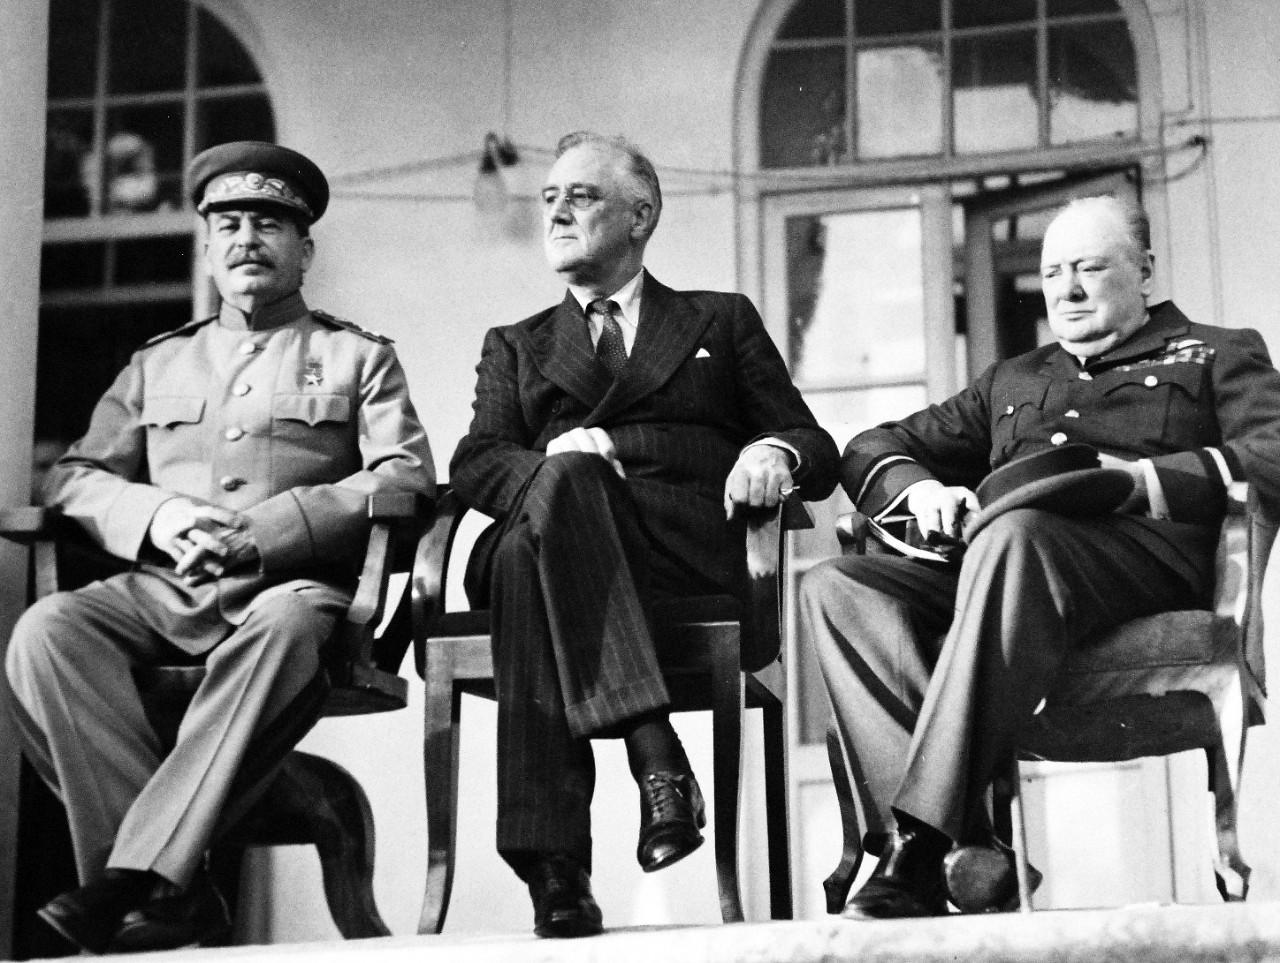 Lot 11597-3:  Tehran Conference, November-December 1943.   The strategy meeting of Premier Joseph Stalin, President Franklin D. Roosevelt, and Prime Minister Winston Churchill at the Russian Embassy at Tehran, Iran.  This conference was the first of “Big Three” leaders (Soviet Union, United States and United Kingdom). U.S. Army photograph from the collection of the Office of War Information.  Courtesy of the Library of Congress.     (2016/01/15).